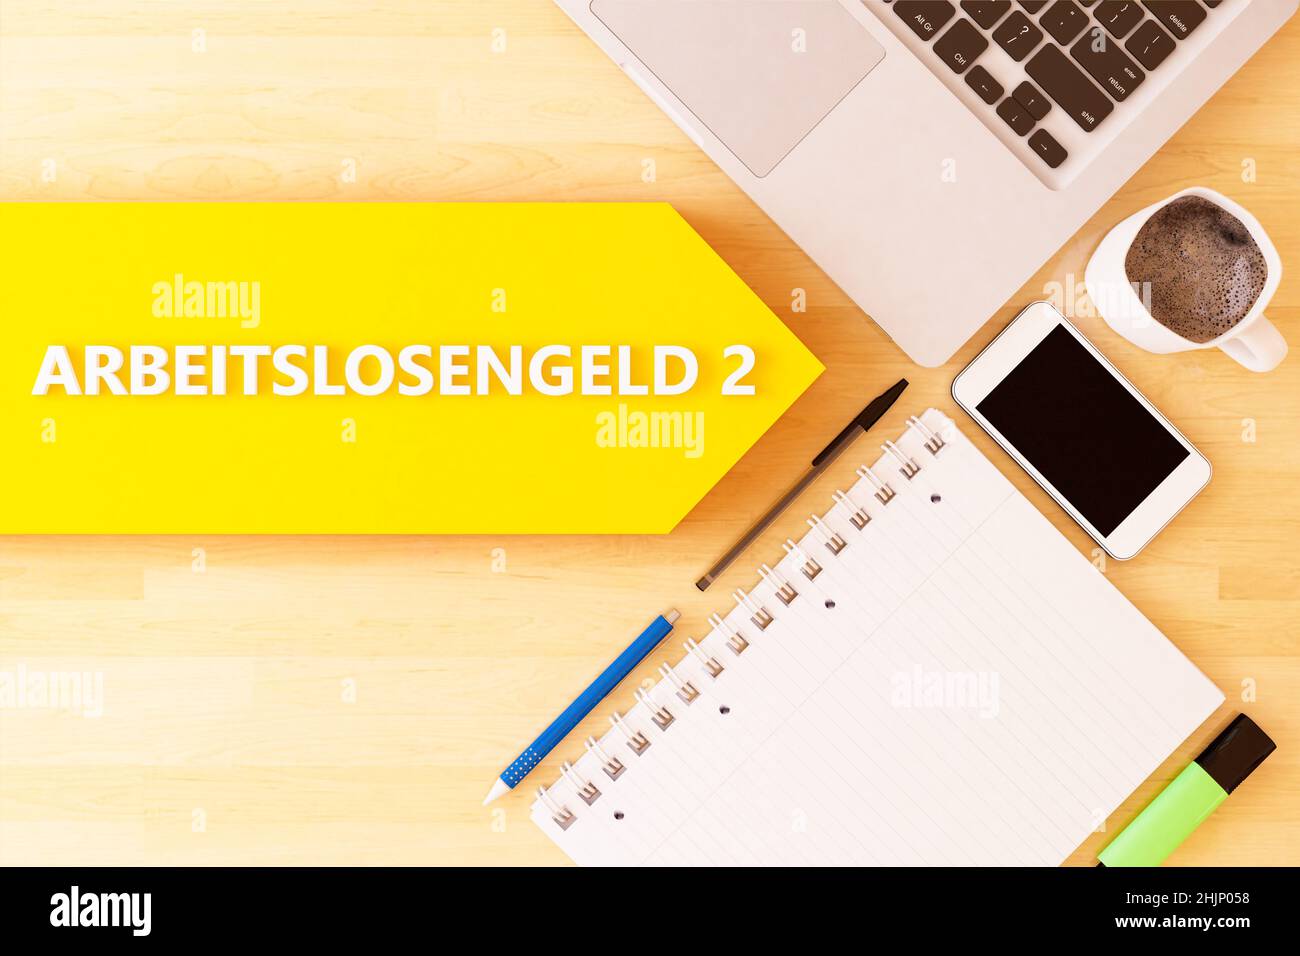 Arbeitslosengeld 2 - german word for unemployment benefit or dole money - linear text arrow concept with notebook, smartphone, pens and coffee mug on Stock Photo